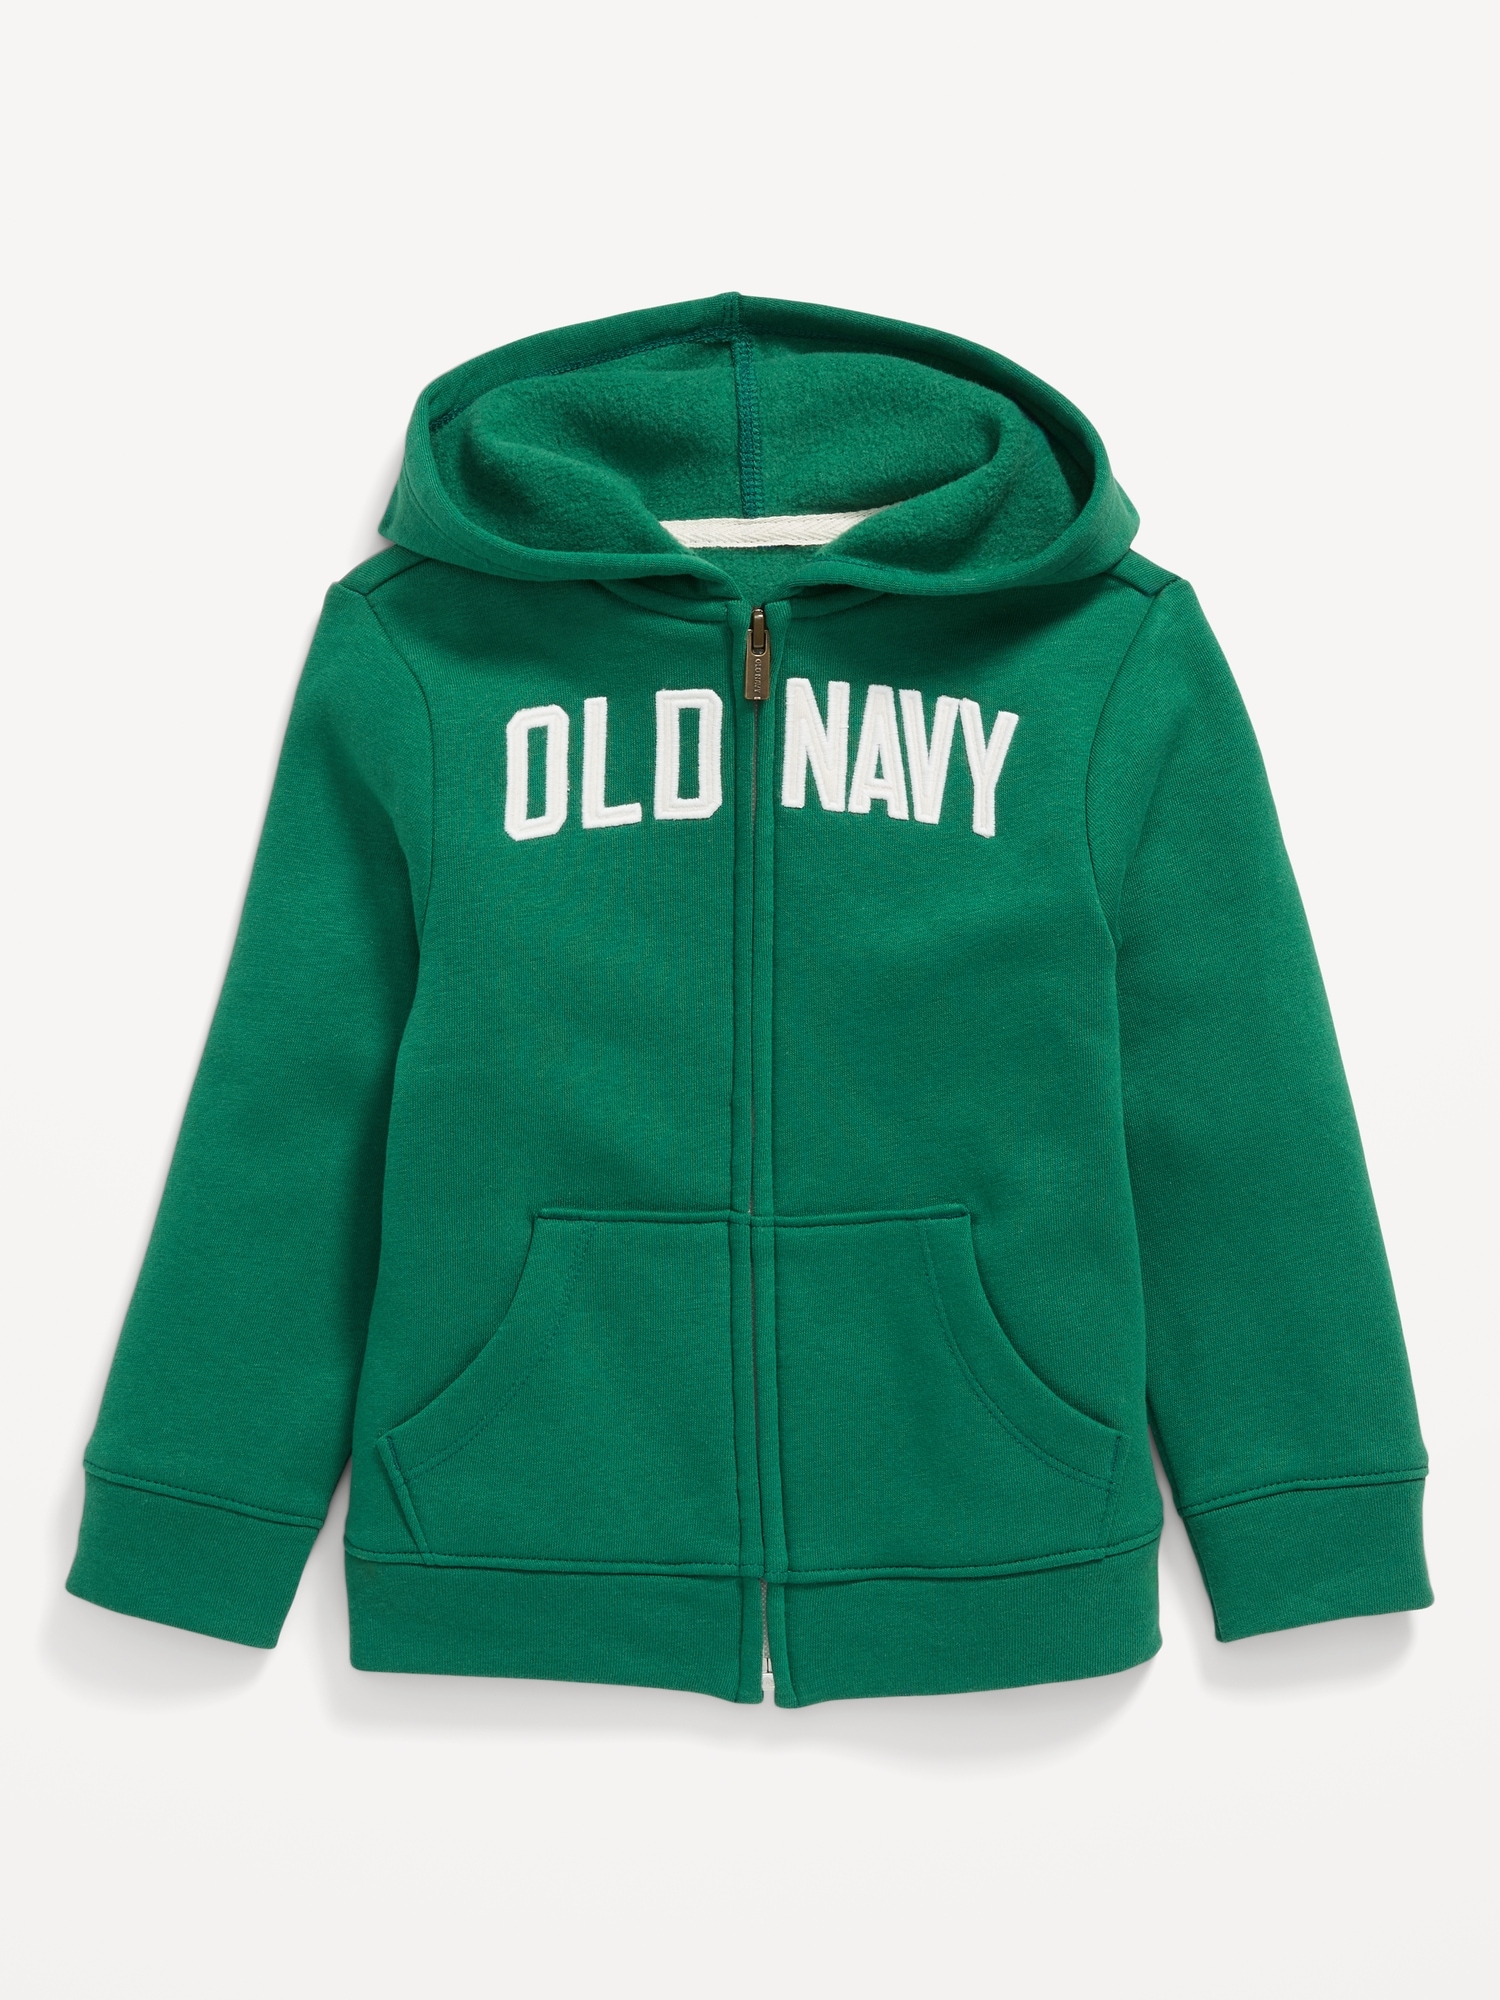 Logo-Graphic Zip-Front Hoodie for Toddler Boys Hot Deal